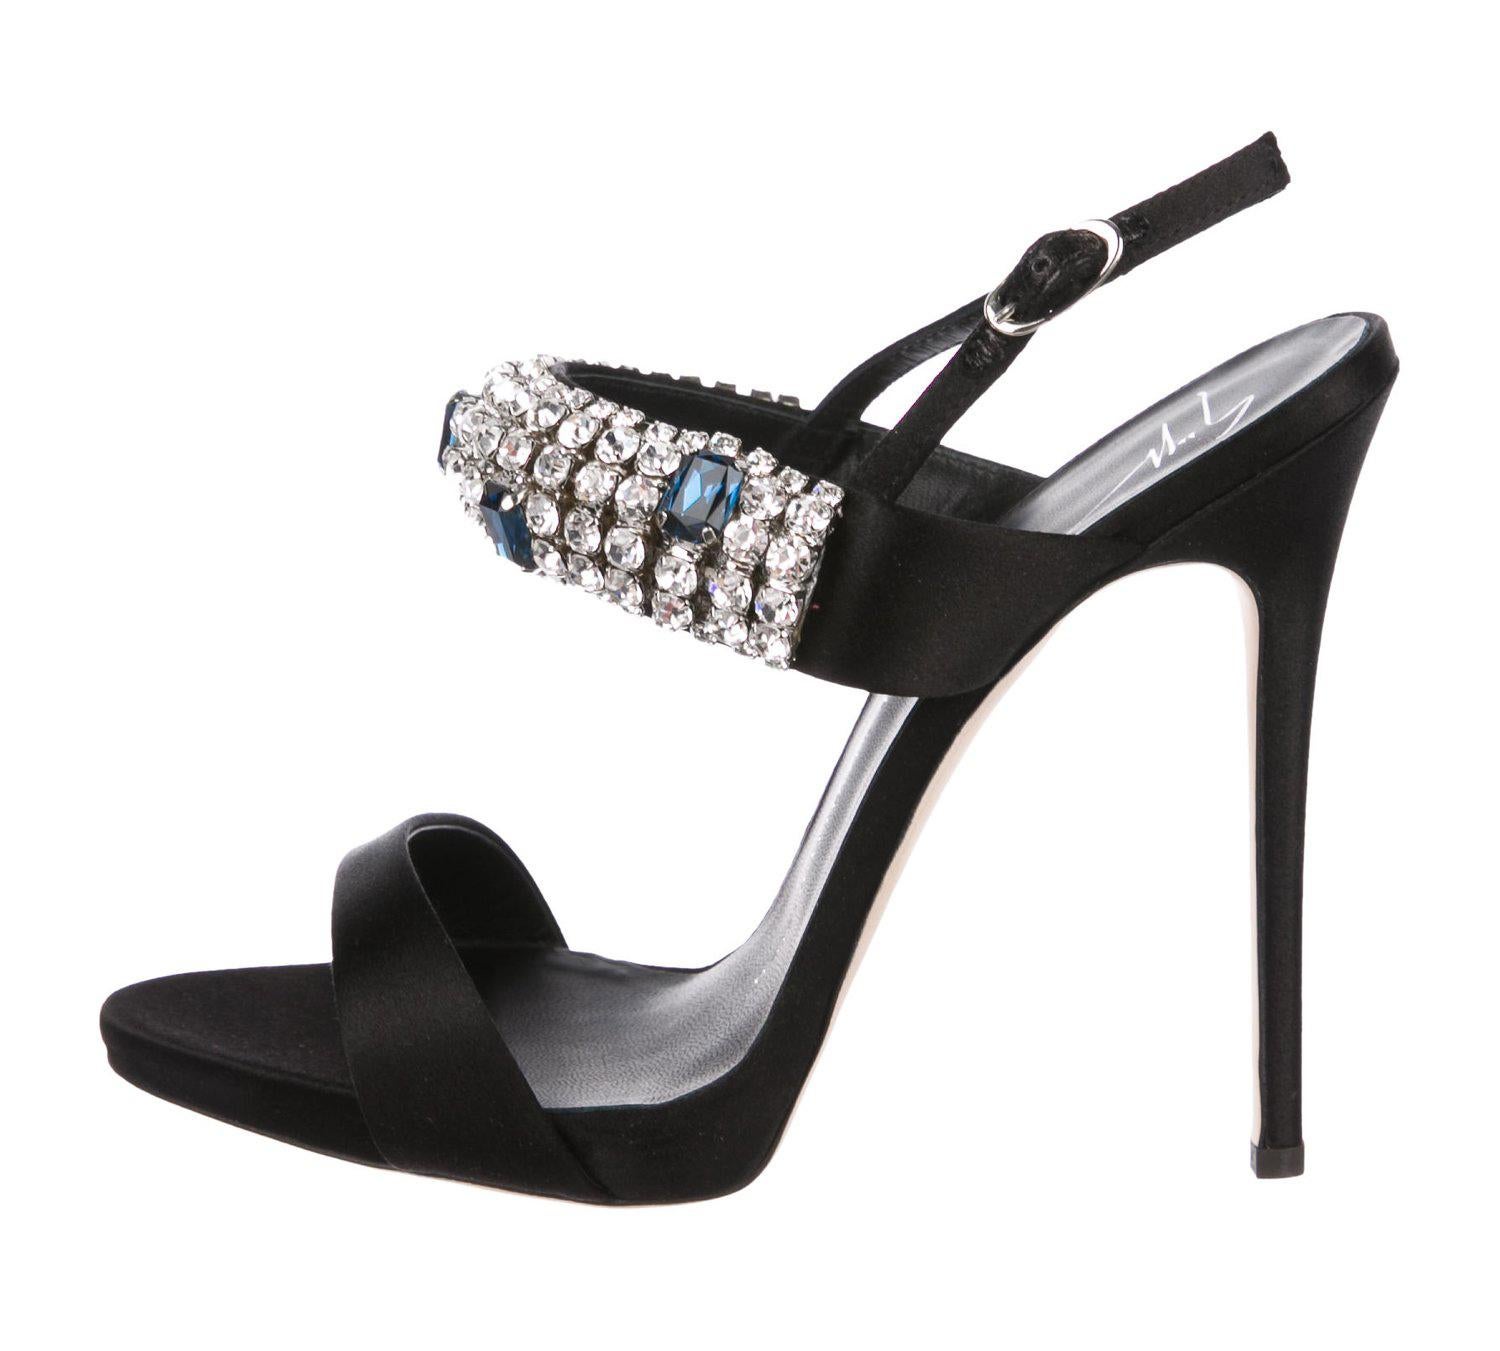 New Giuseppe Zanotti *Carine* Black Crystal Embellished Satin Sandals
Designer size 38 - US 8
Crystal Embellishments at Upper, Covered High Heels, Buckle Closures at Ankle, Leather Sole.
Heel Height - 5 inches.
Made in Italy
New with box.
Retail